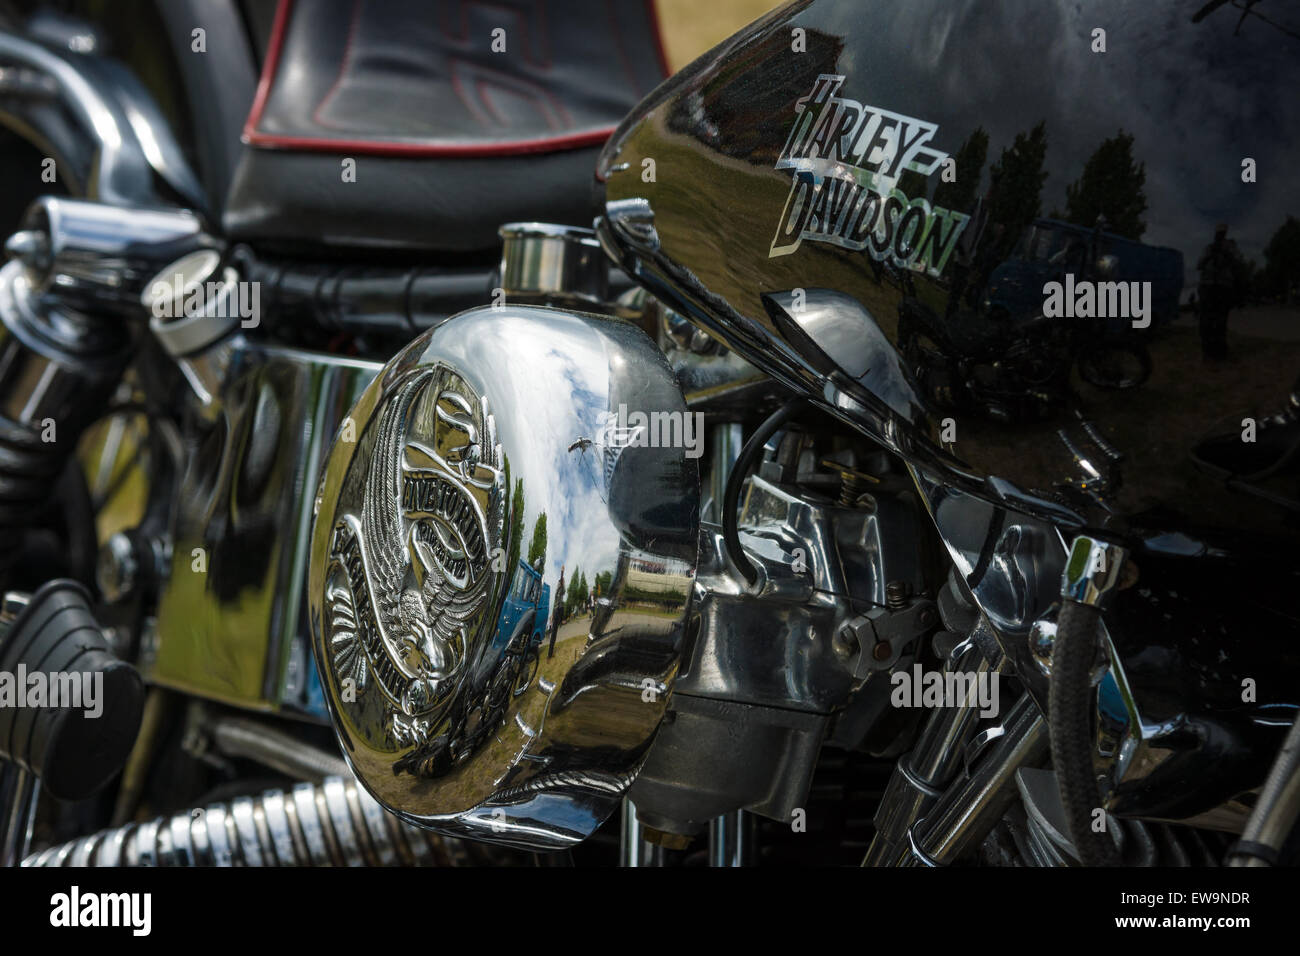 PAAREN IM GLIEN, GERMANY - MAY 23, 2015: Fragment of a motorcycle Harley-Davidson close-up. The oldtimer show in MAFZ. Stock Photo